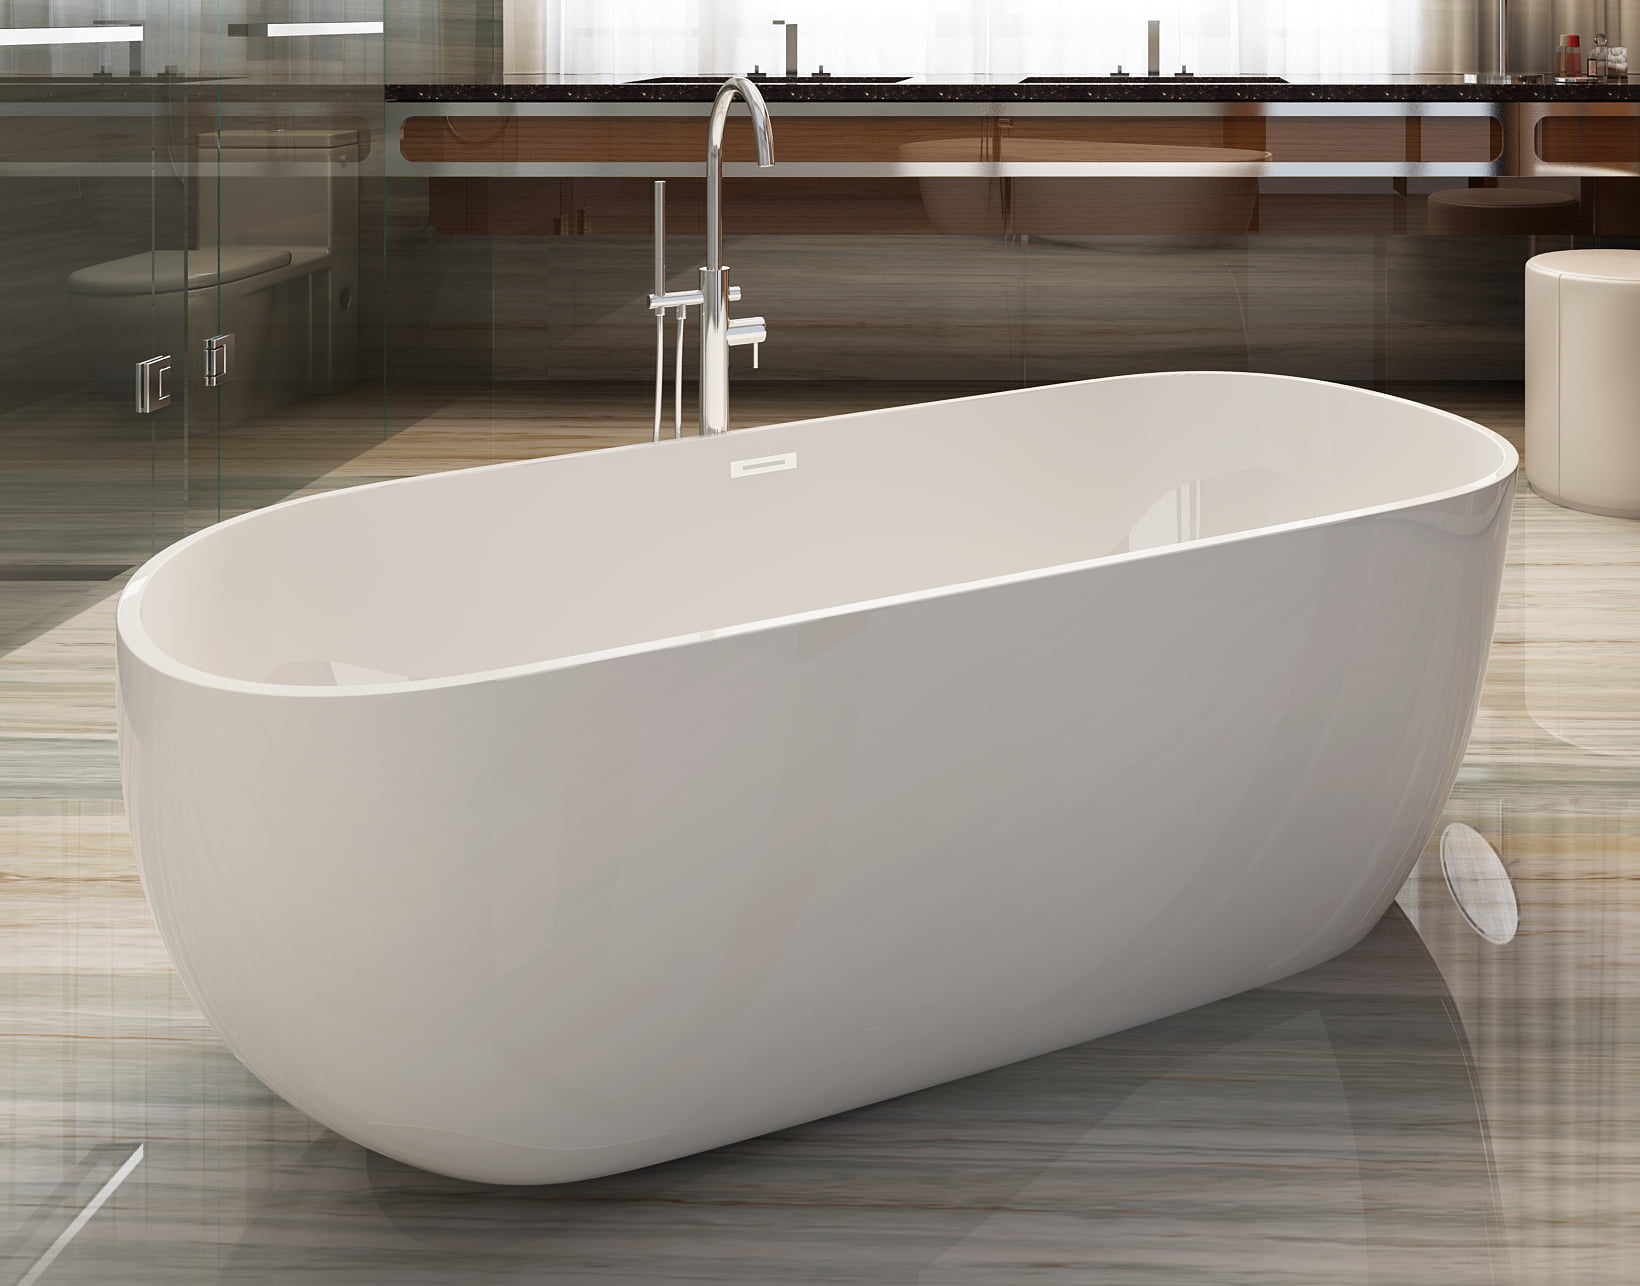 Picture of ALFI Brand AB8838 59 in. White Oval Acrylic Free Standing Soaking Bathtub